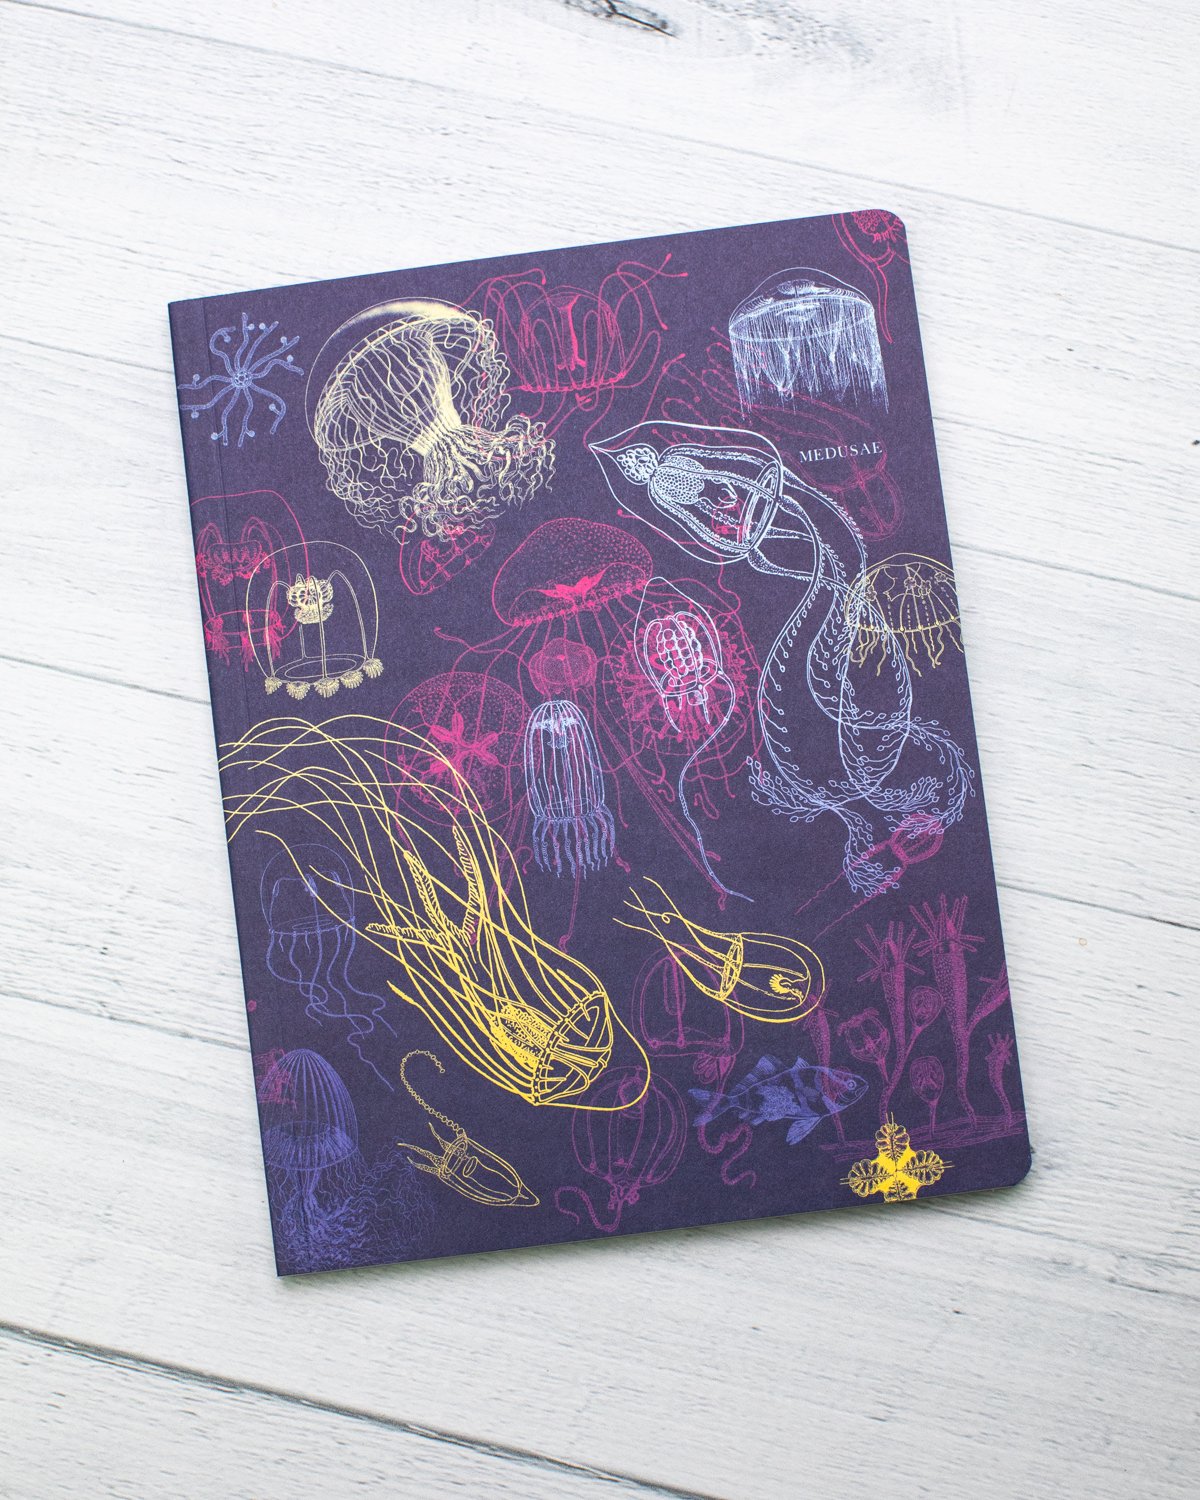 Jellyfish Softcover Notebook - Lined